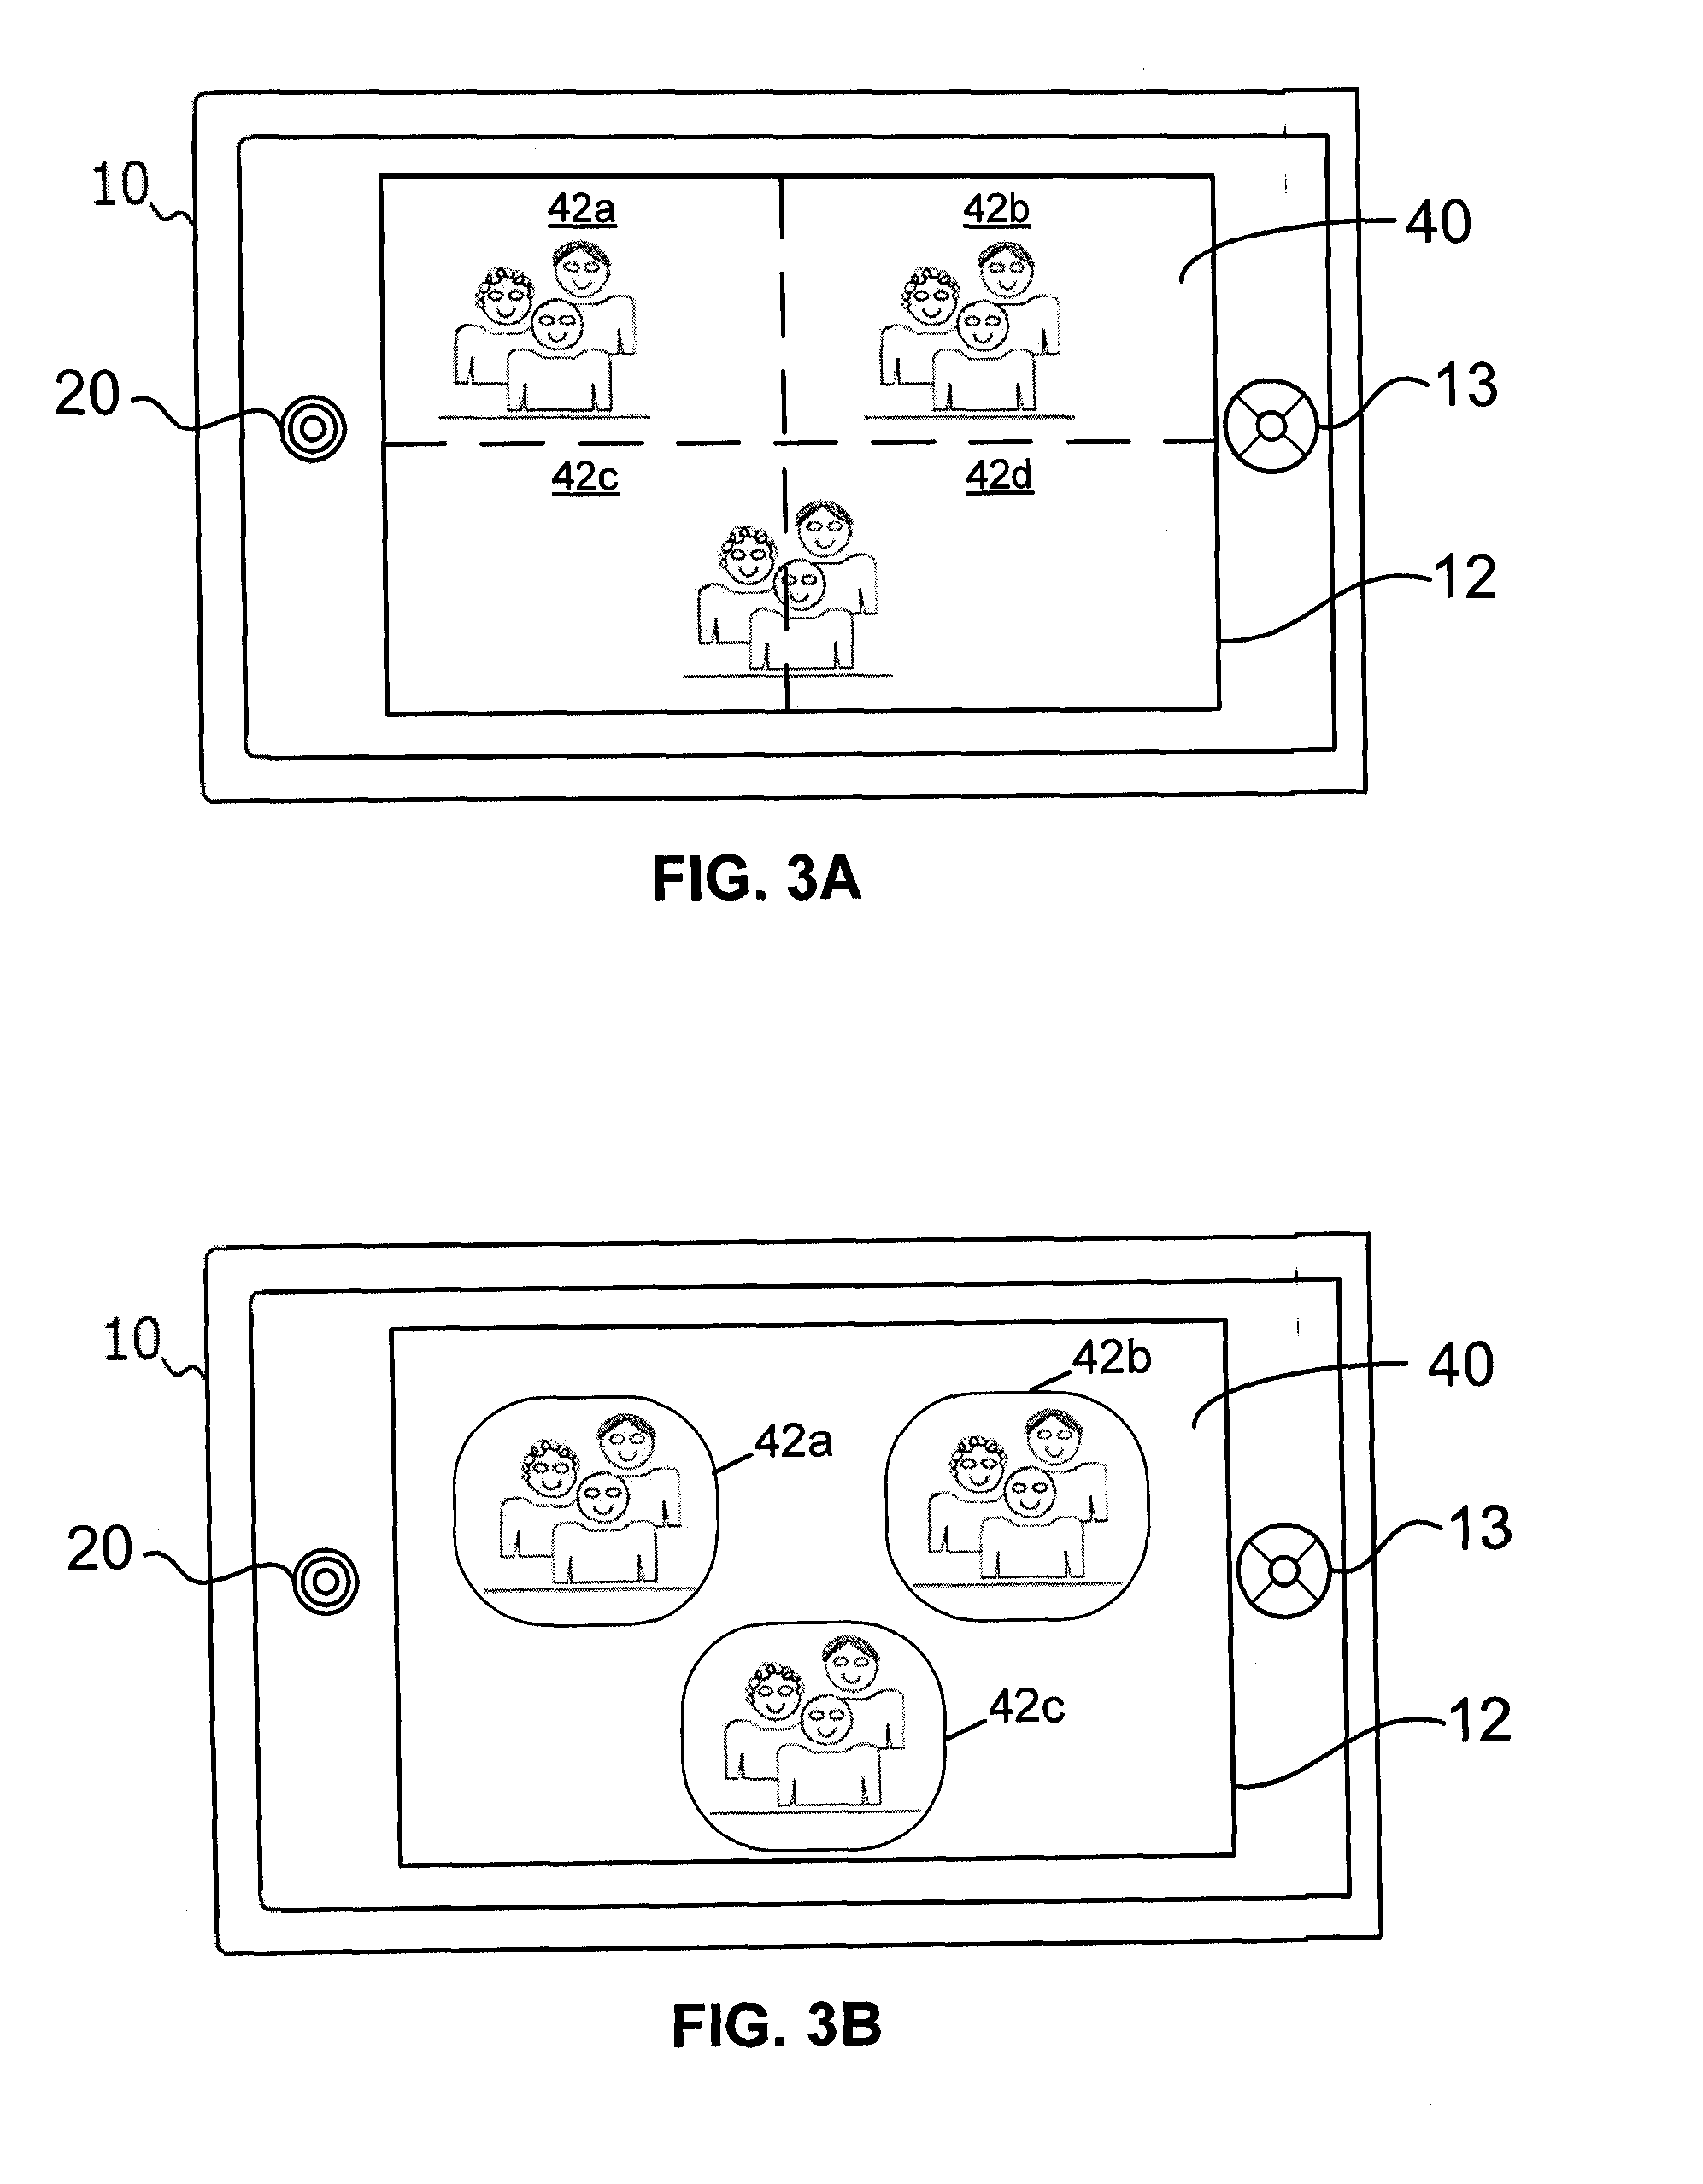 Method and system for providing an improved audio experience for viewers of video